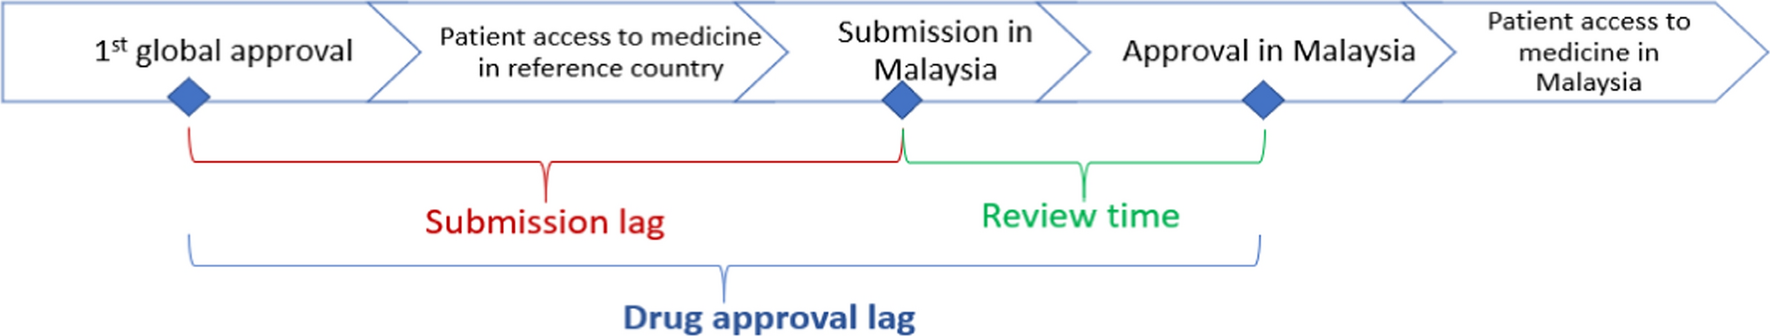 Access to Innovative Medicines: Regulation Change and Factors Associated with Drug Approval Lag in Malaysia